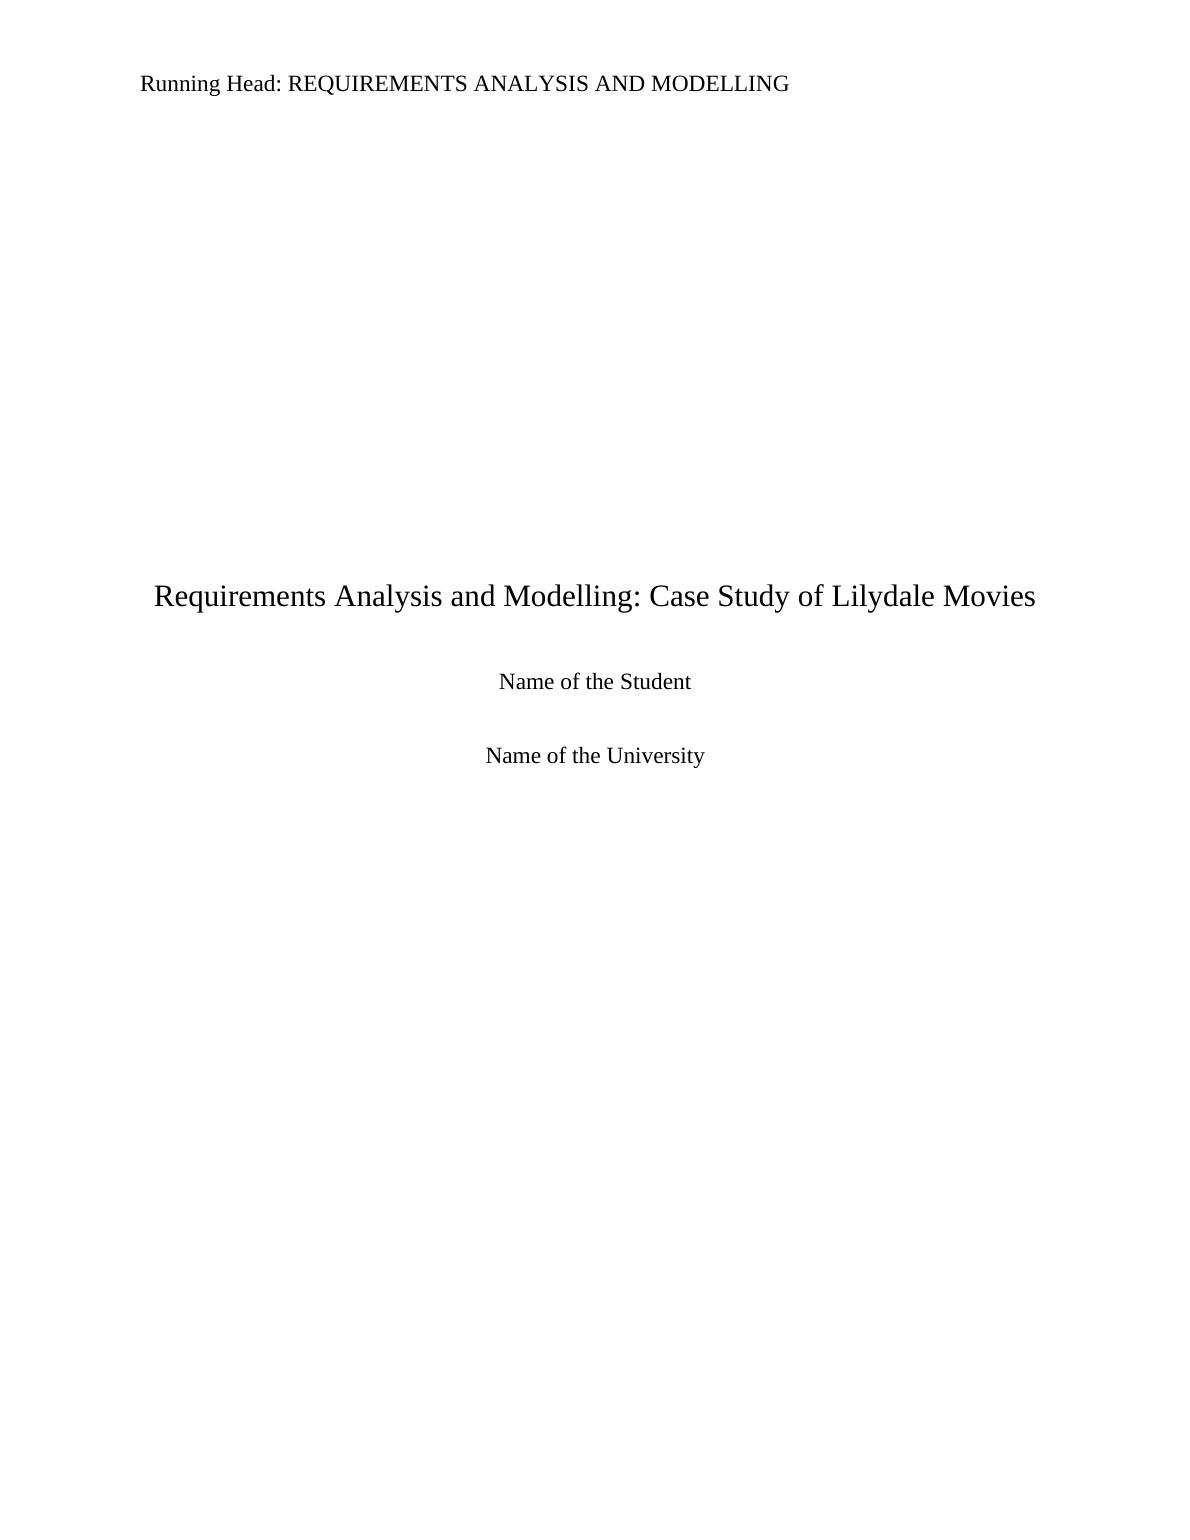 Analysis and Modelling: Case Study of Lilydale Movies_1